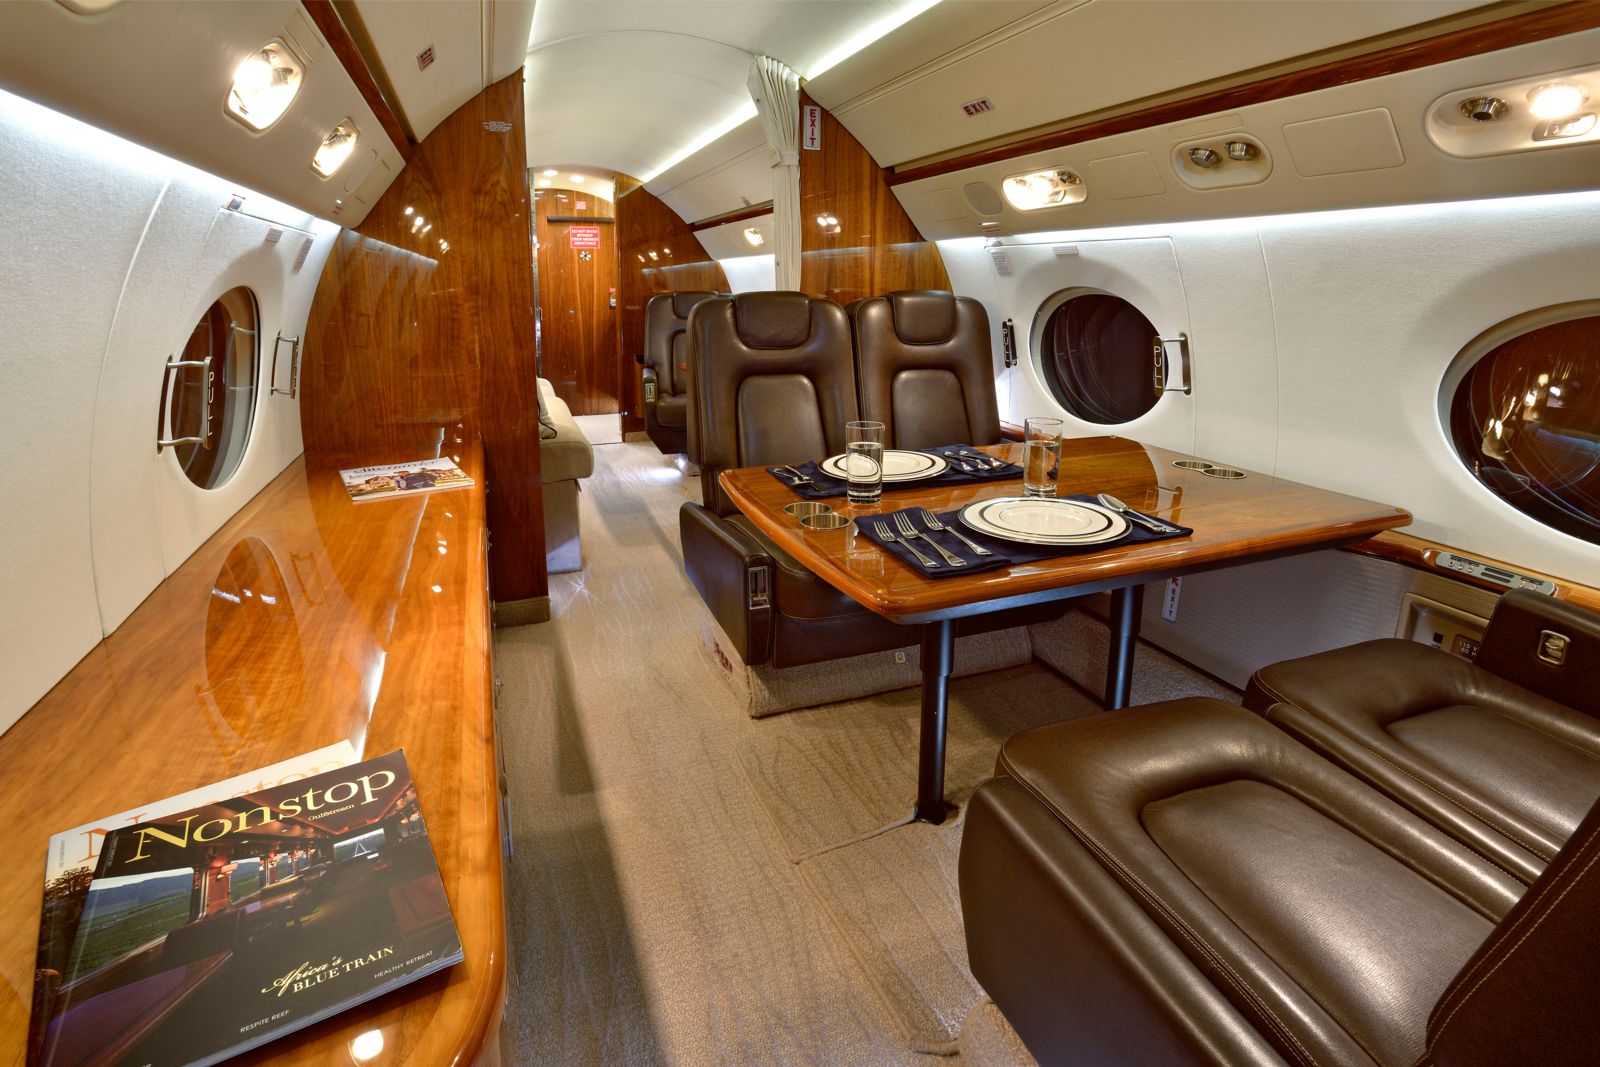 Gulfstream G550  S/N 5211 for sale | gallery image: /userfiles/images/G550_SN_5211/int8b_300.jpg